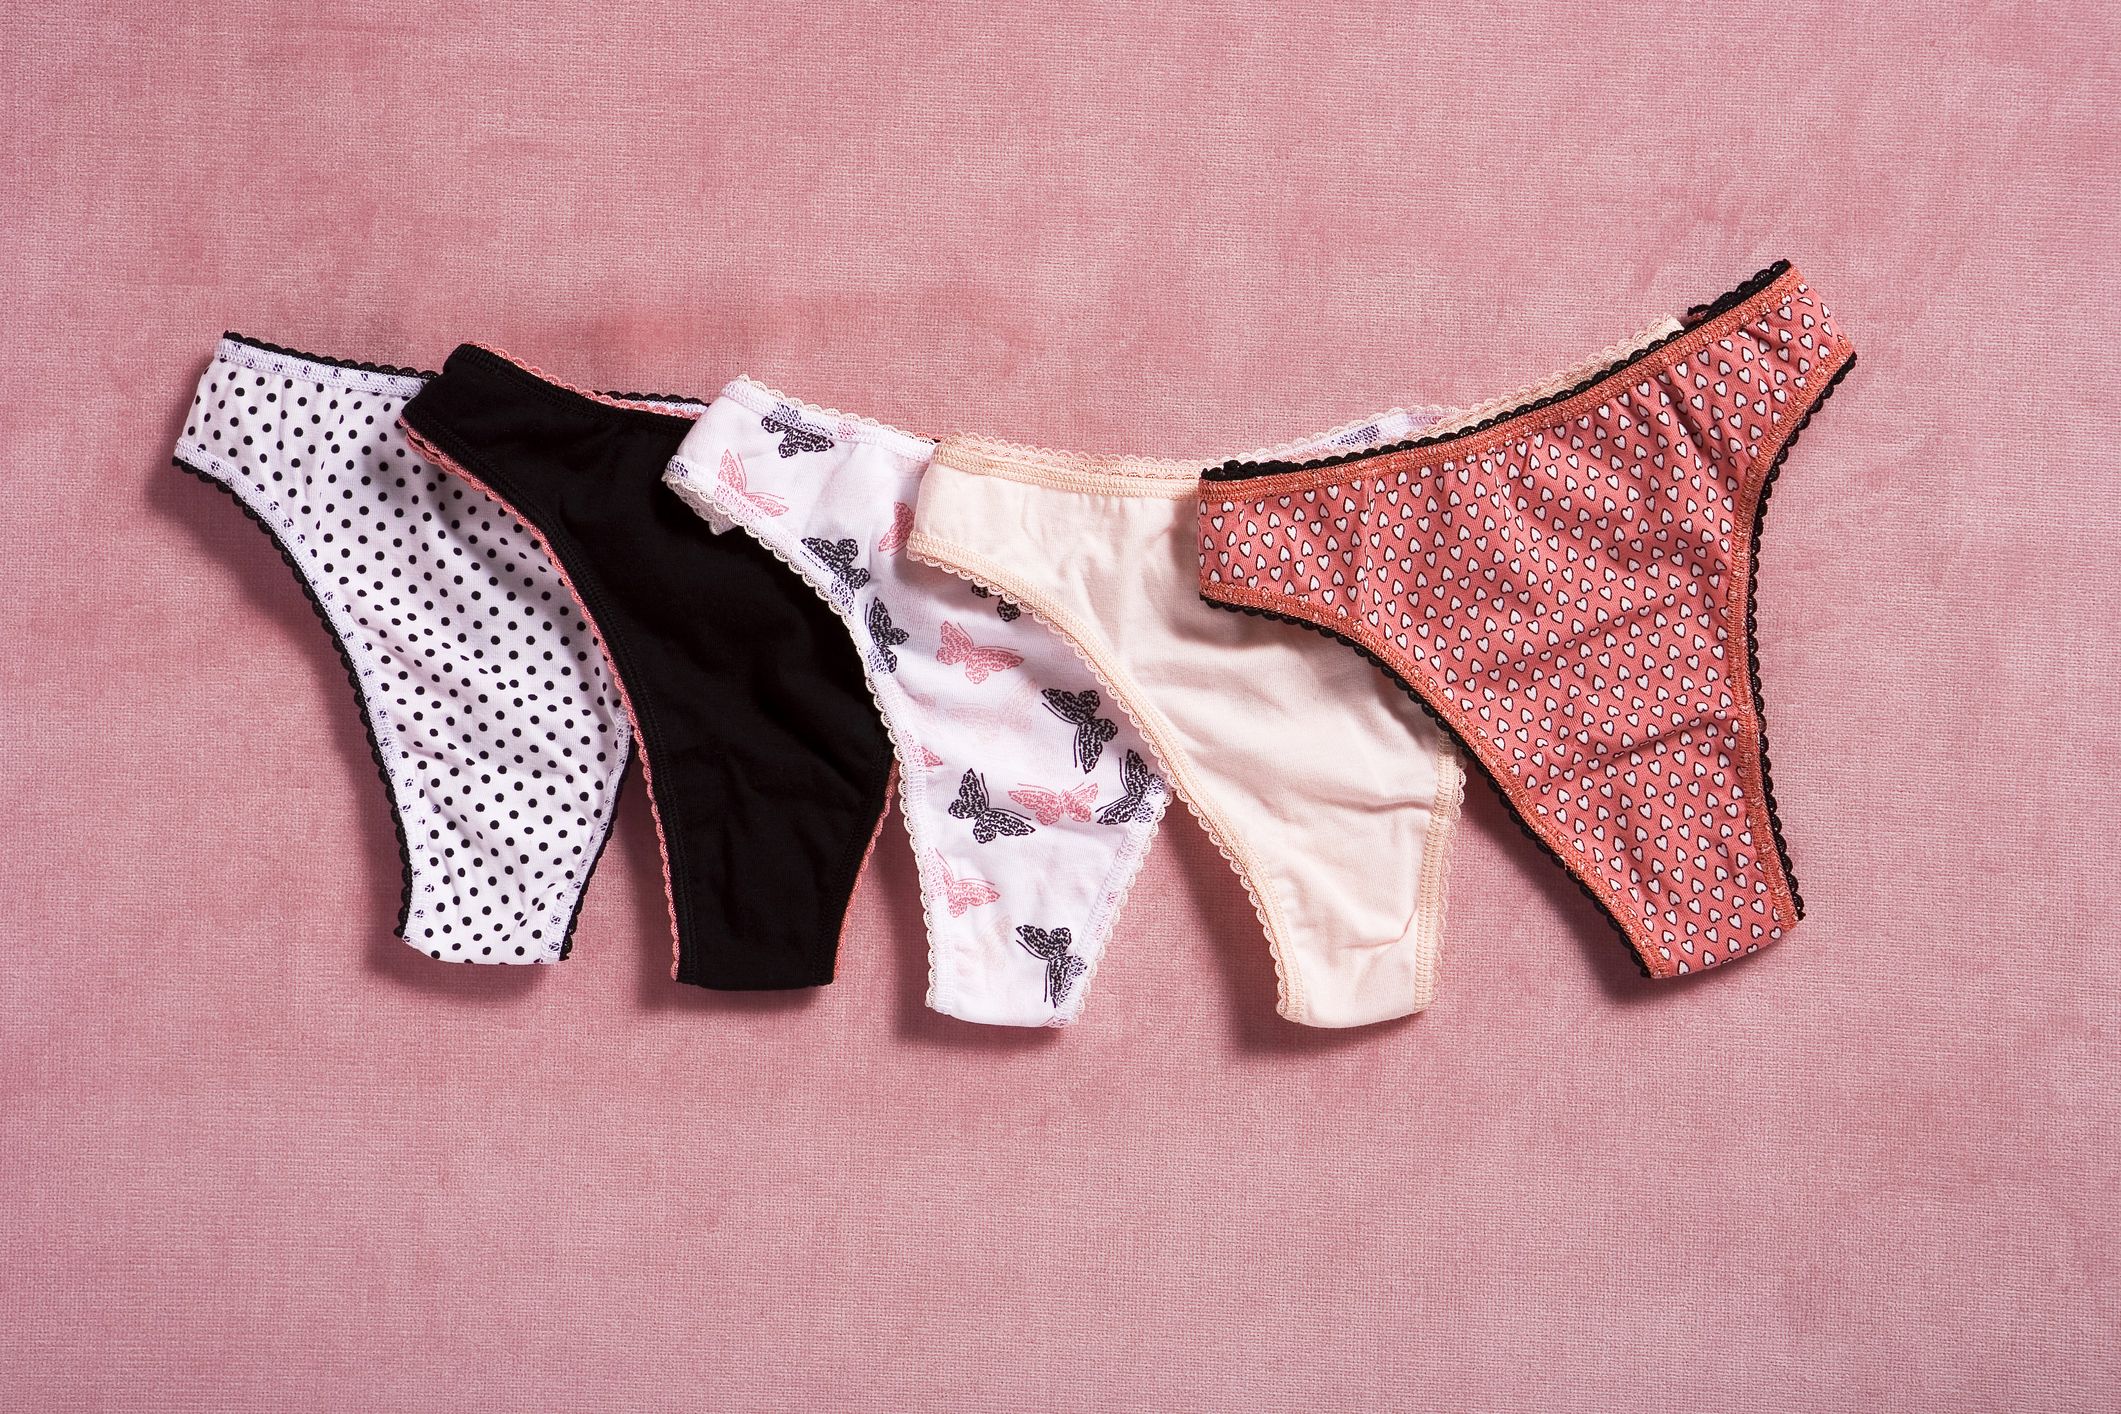 Used underwear for sale: How buying lingerie on the cheap may pose a health  risk